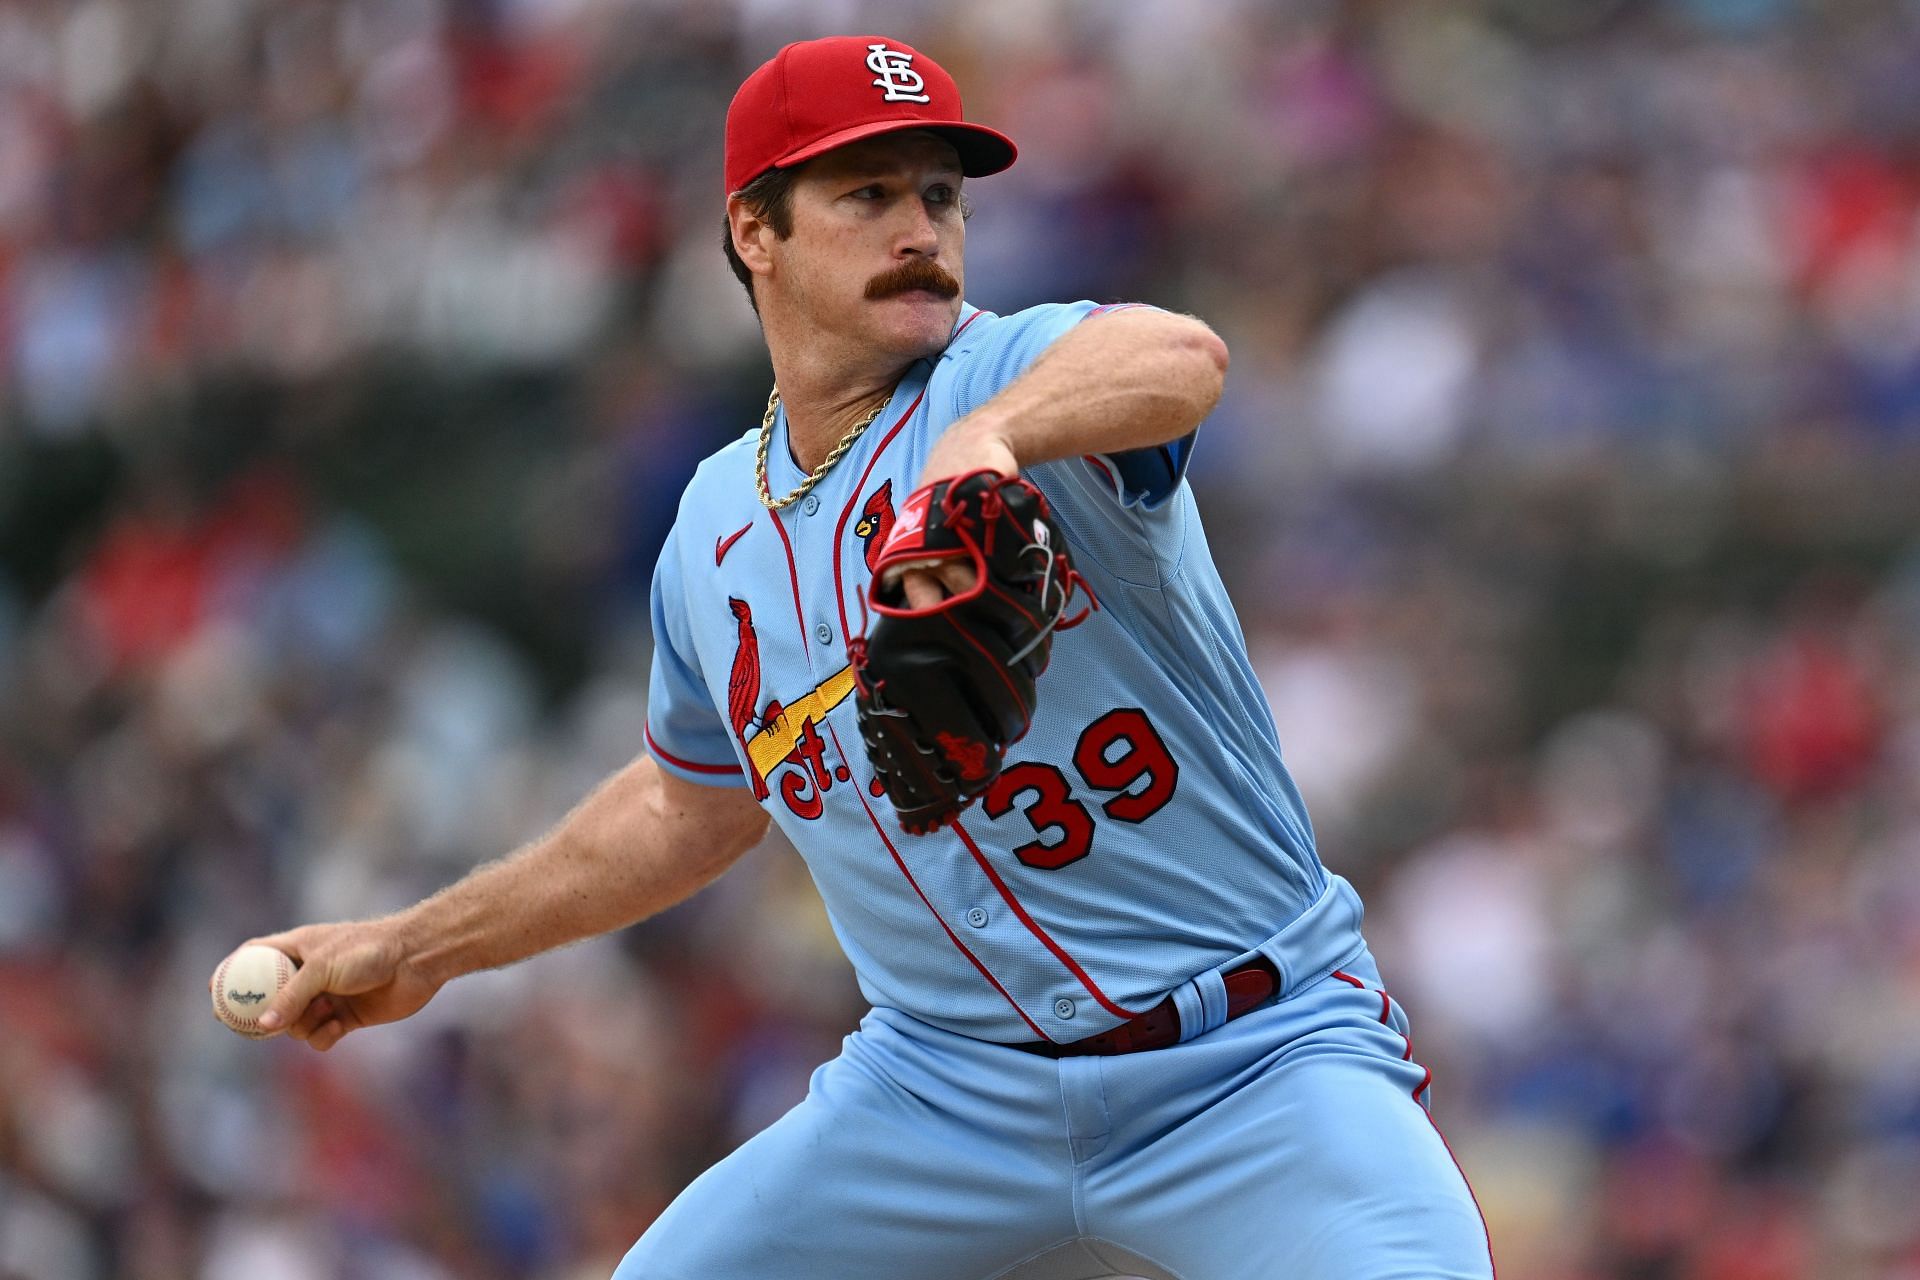 Miles Mikolas played for the St. Louis Cardinals and San Diego Padres